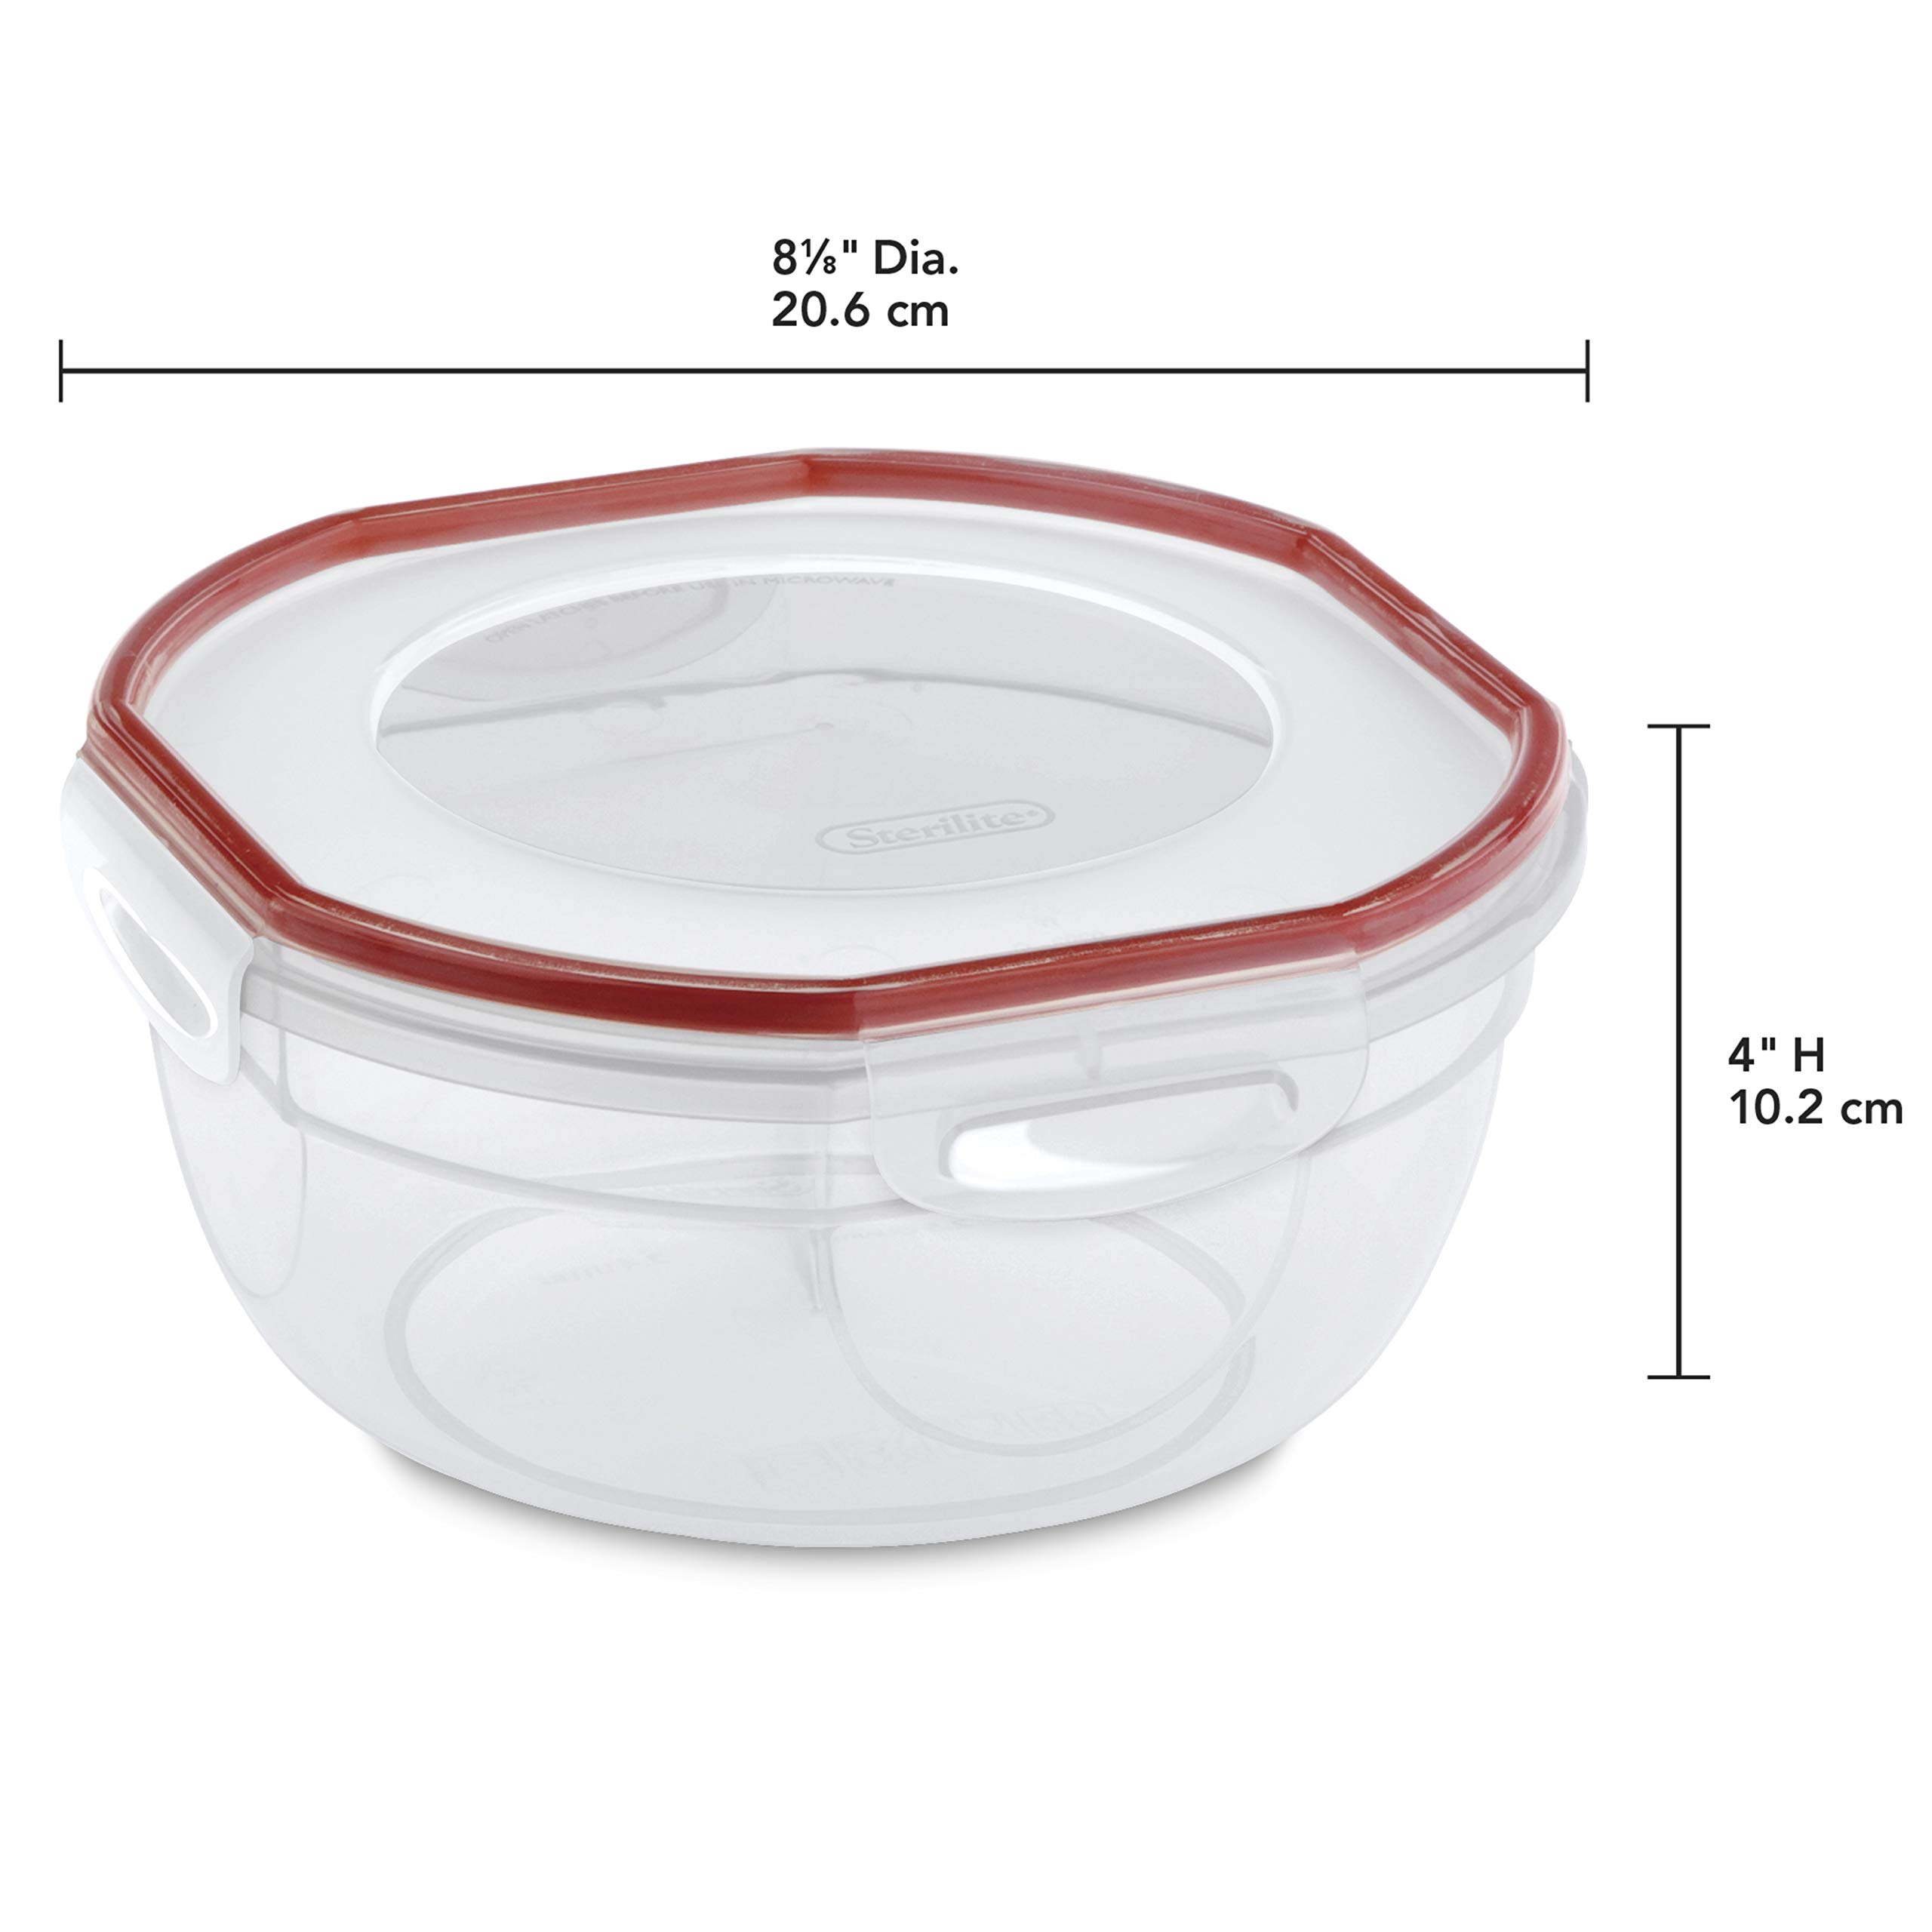 Sterilite 0 Ultra-Seal 2.5 Quart Bowl, Clear Lid & Base with Rocket Red Gasket, 4-Pack